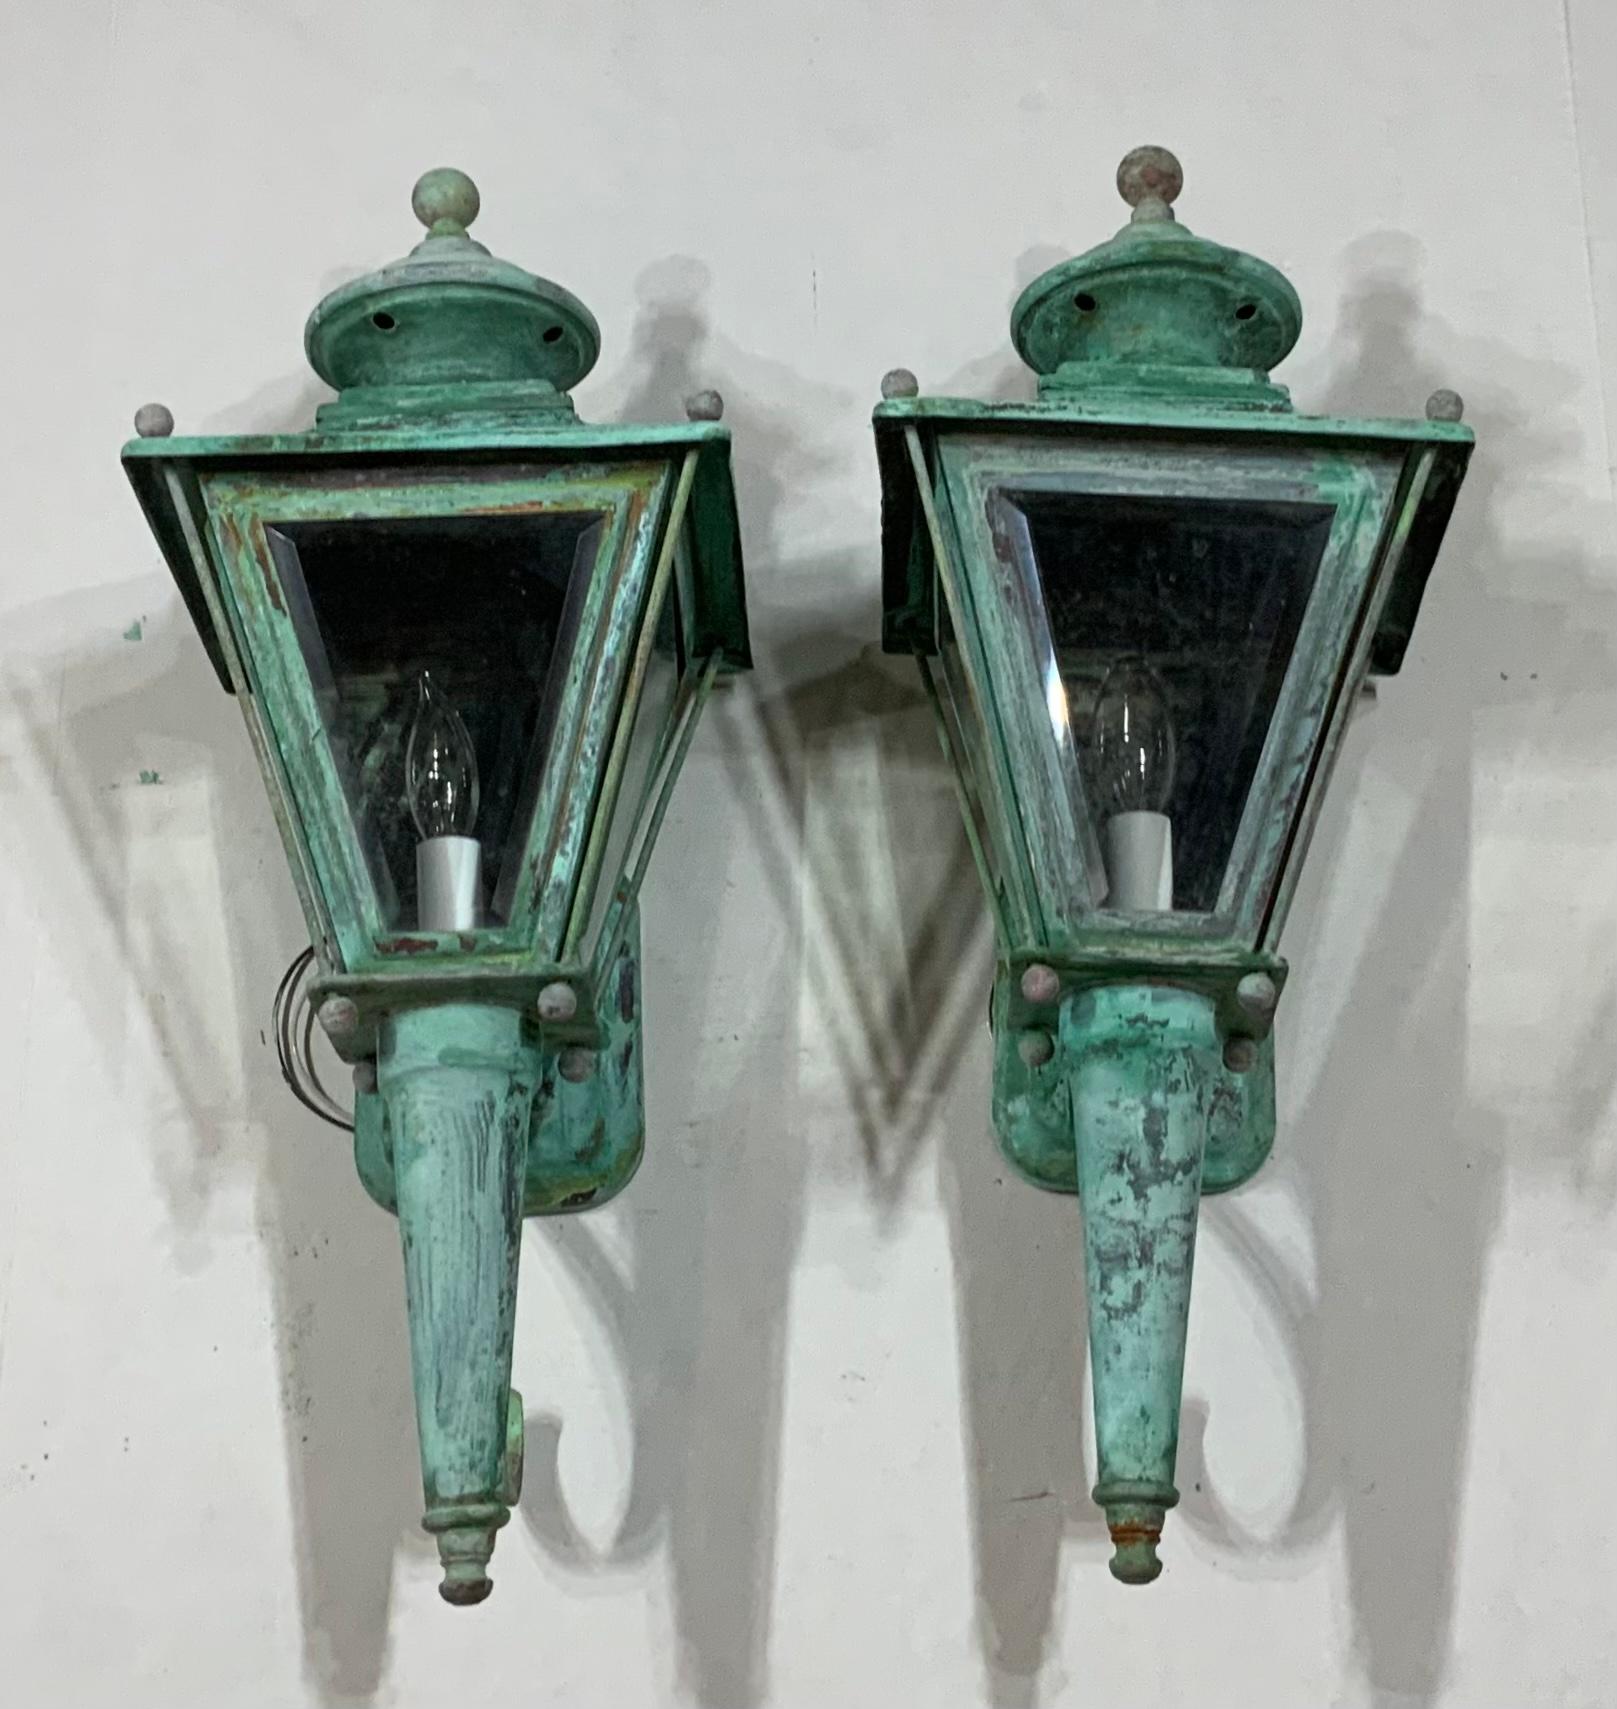 Elegant pair of vintage wall lantern hand crafted from brass with one 60/watt light each. Beveled glass.
This pair of lantern is newly electrified, one side glass panel is flat instead beveled.
Beautiful decorative pair of lantern indoor or